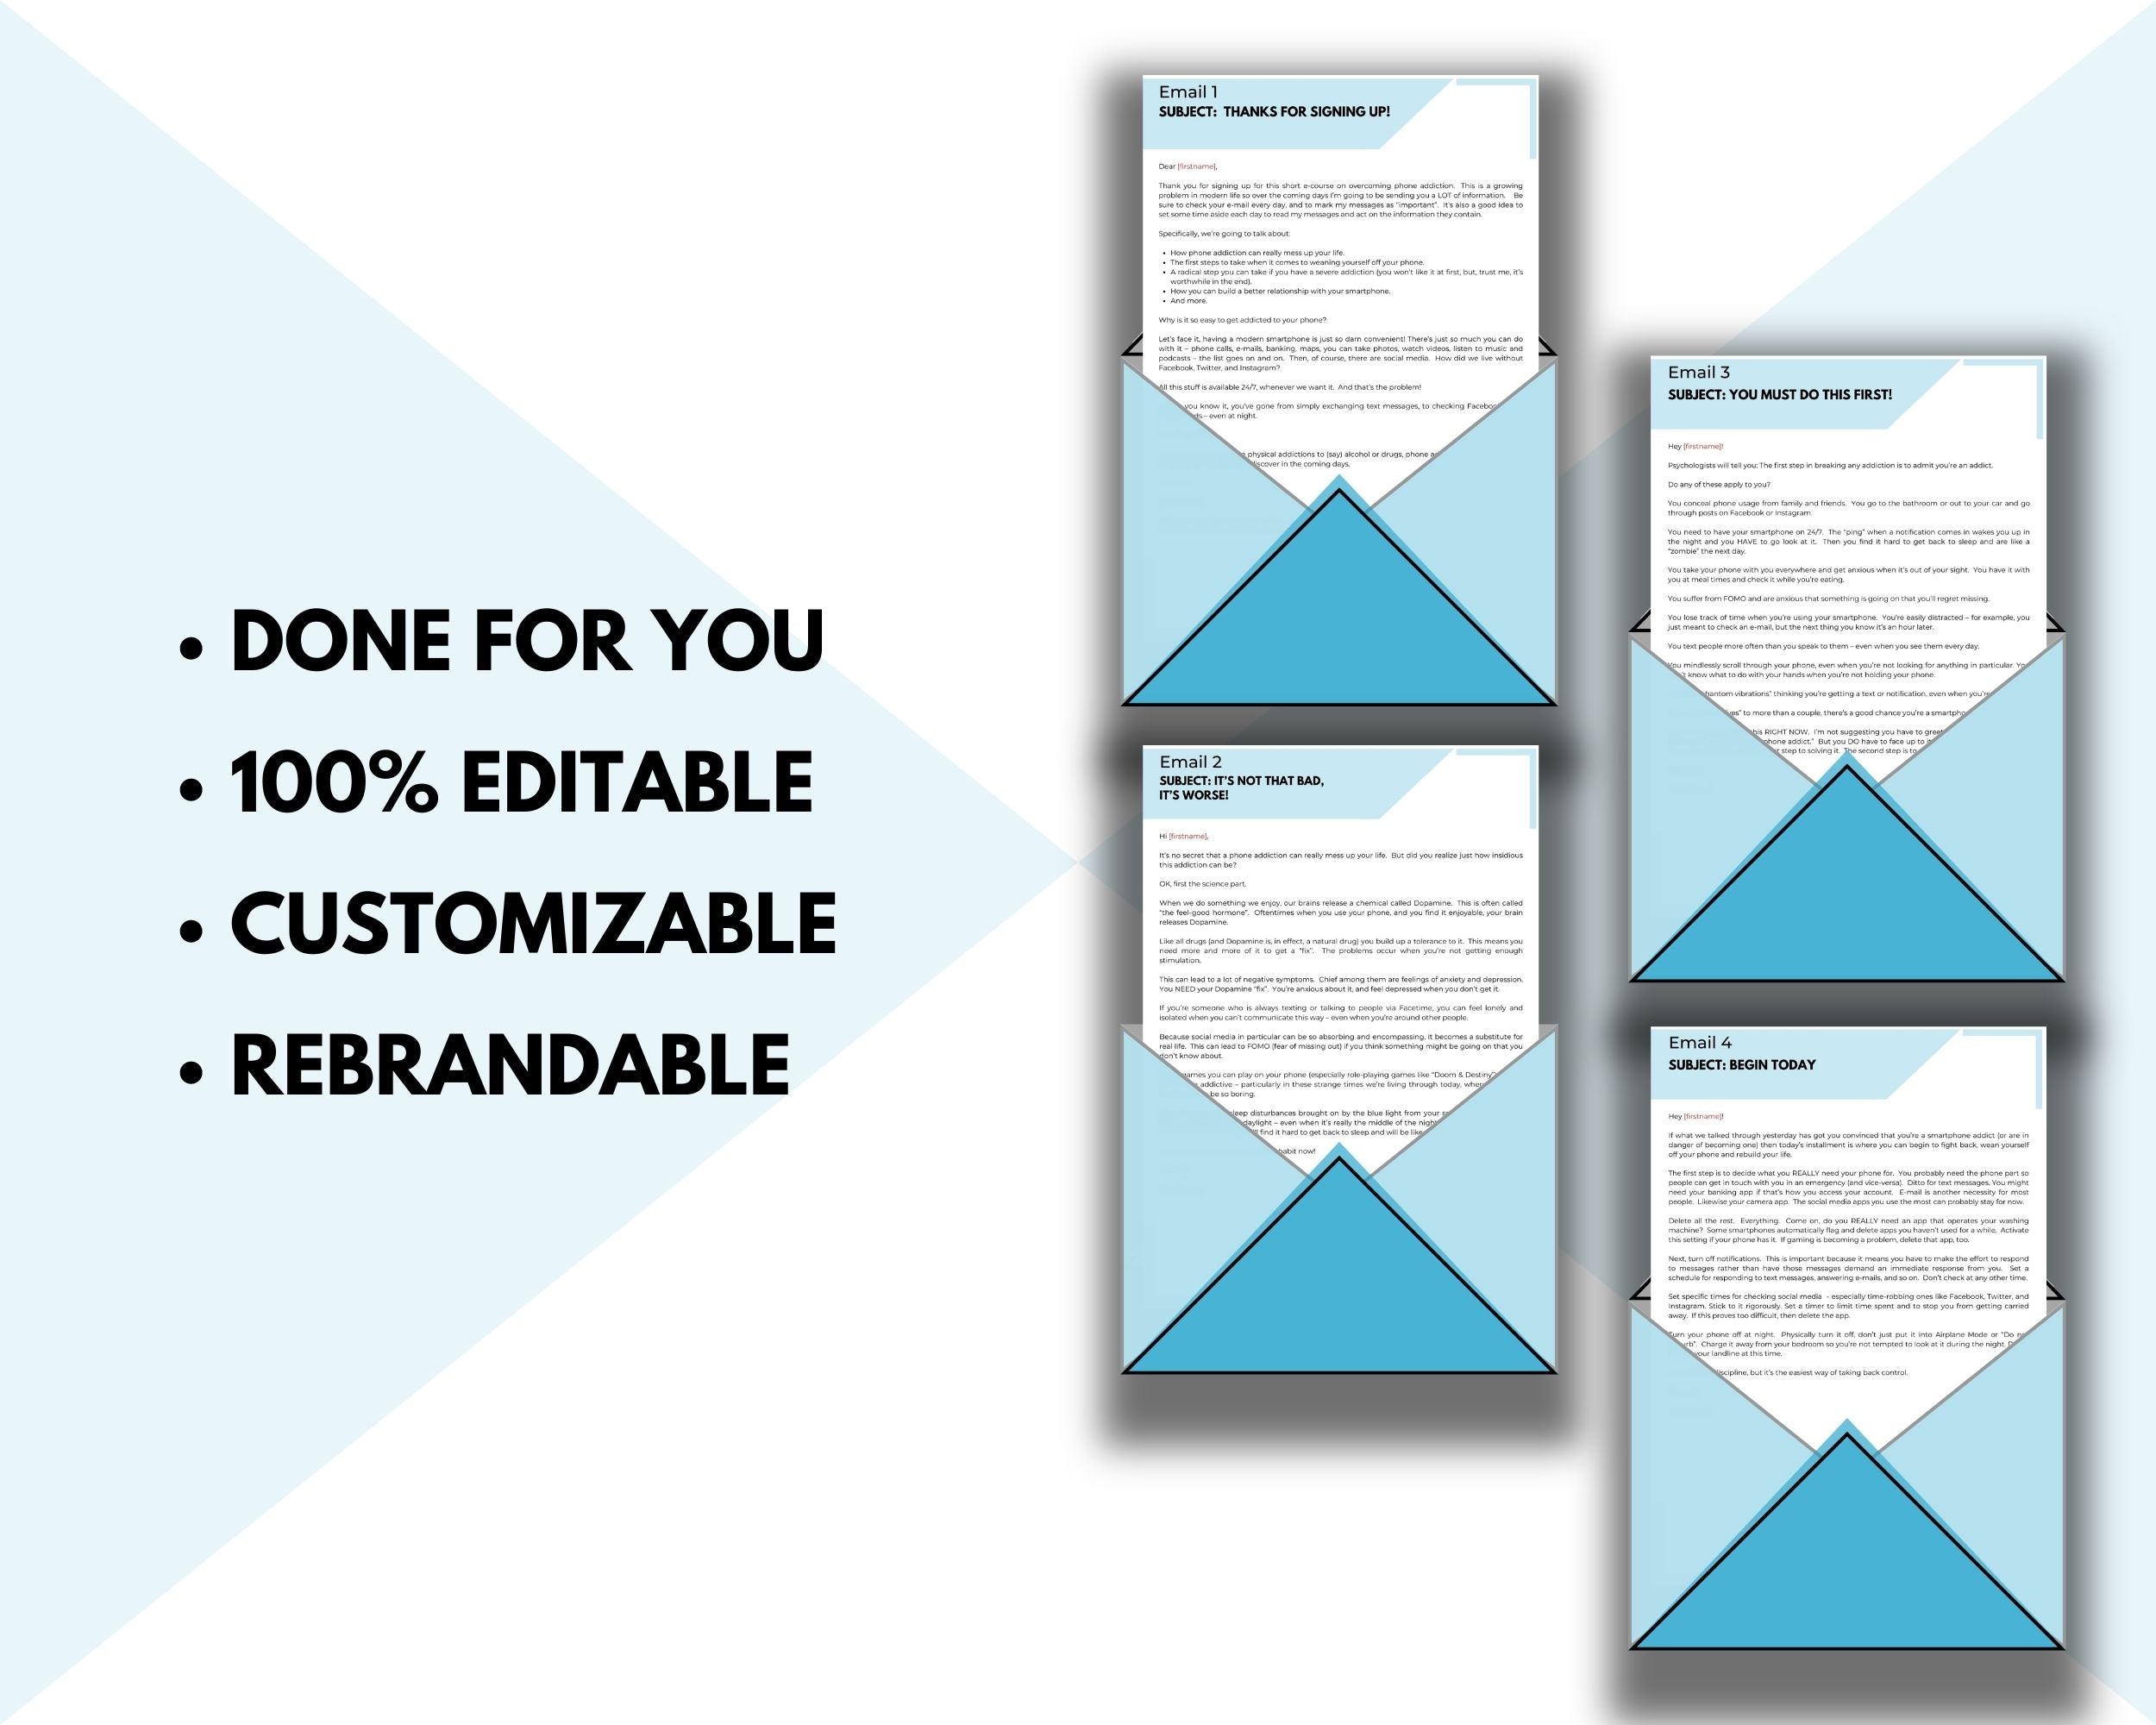 Overcome Phone Addiction Emails | Rebrandable Done-for-You eCourse